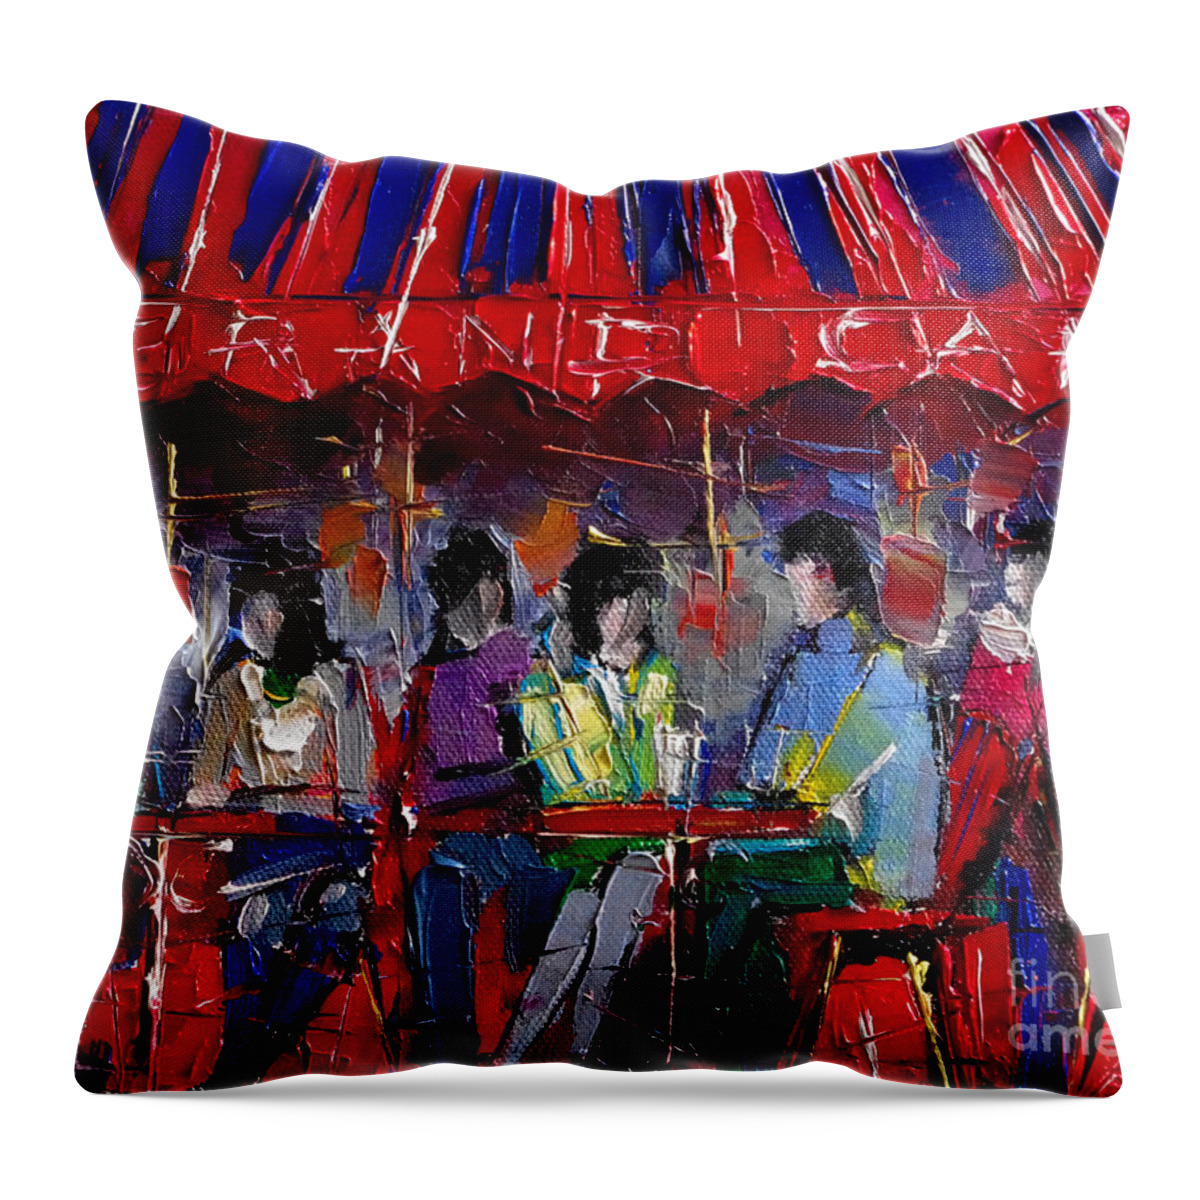 Grand Cafe Throw Pillow featuring the painting Urban Story - Grand Cafe by Mona Edulesco